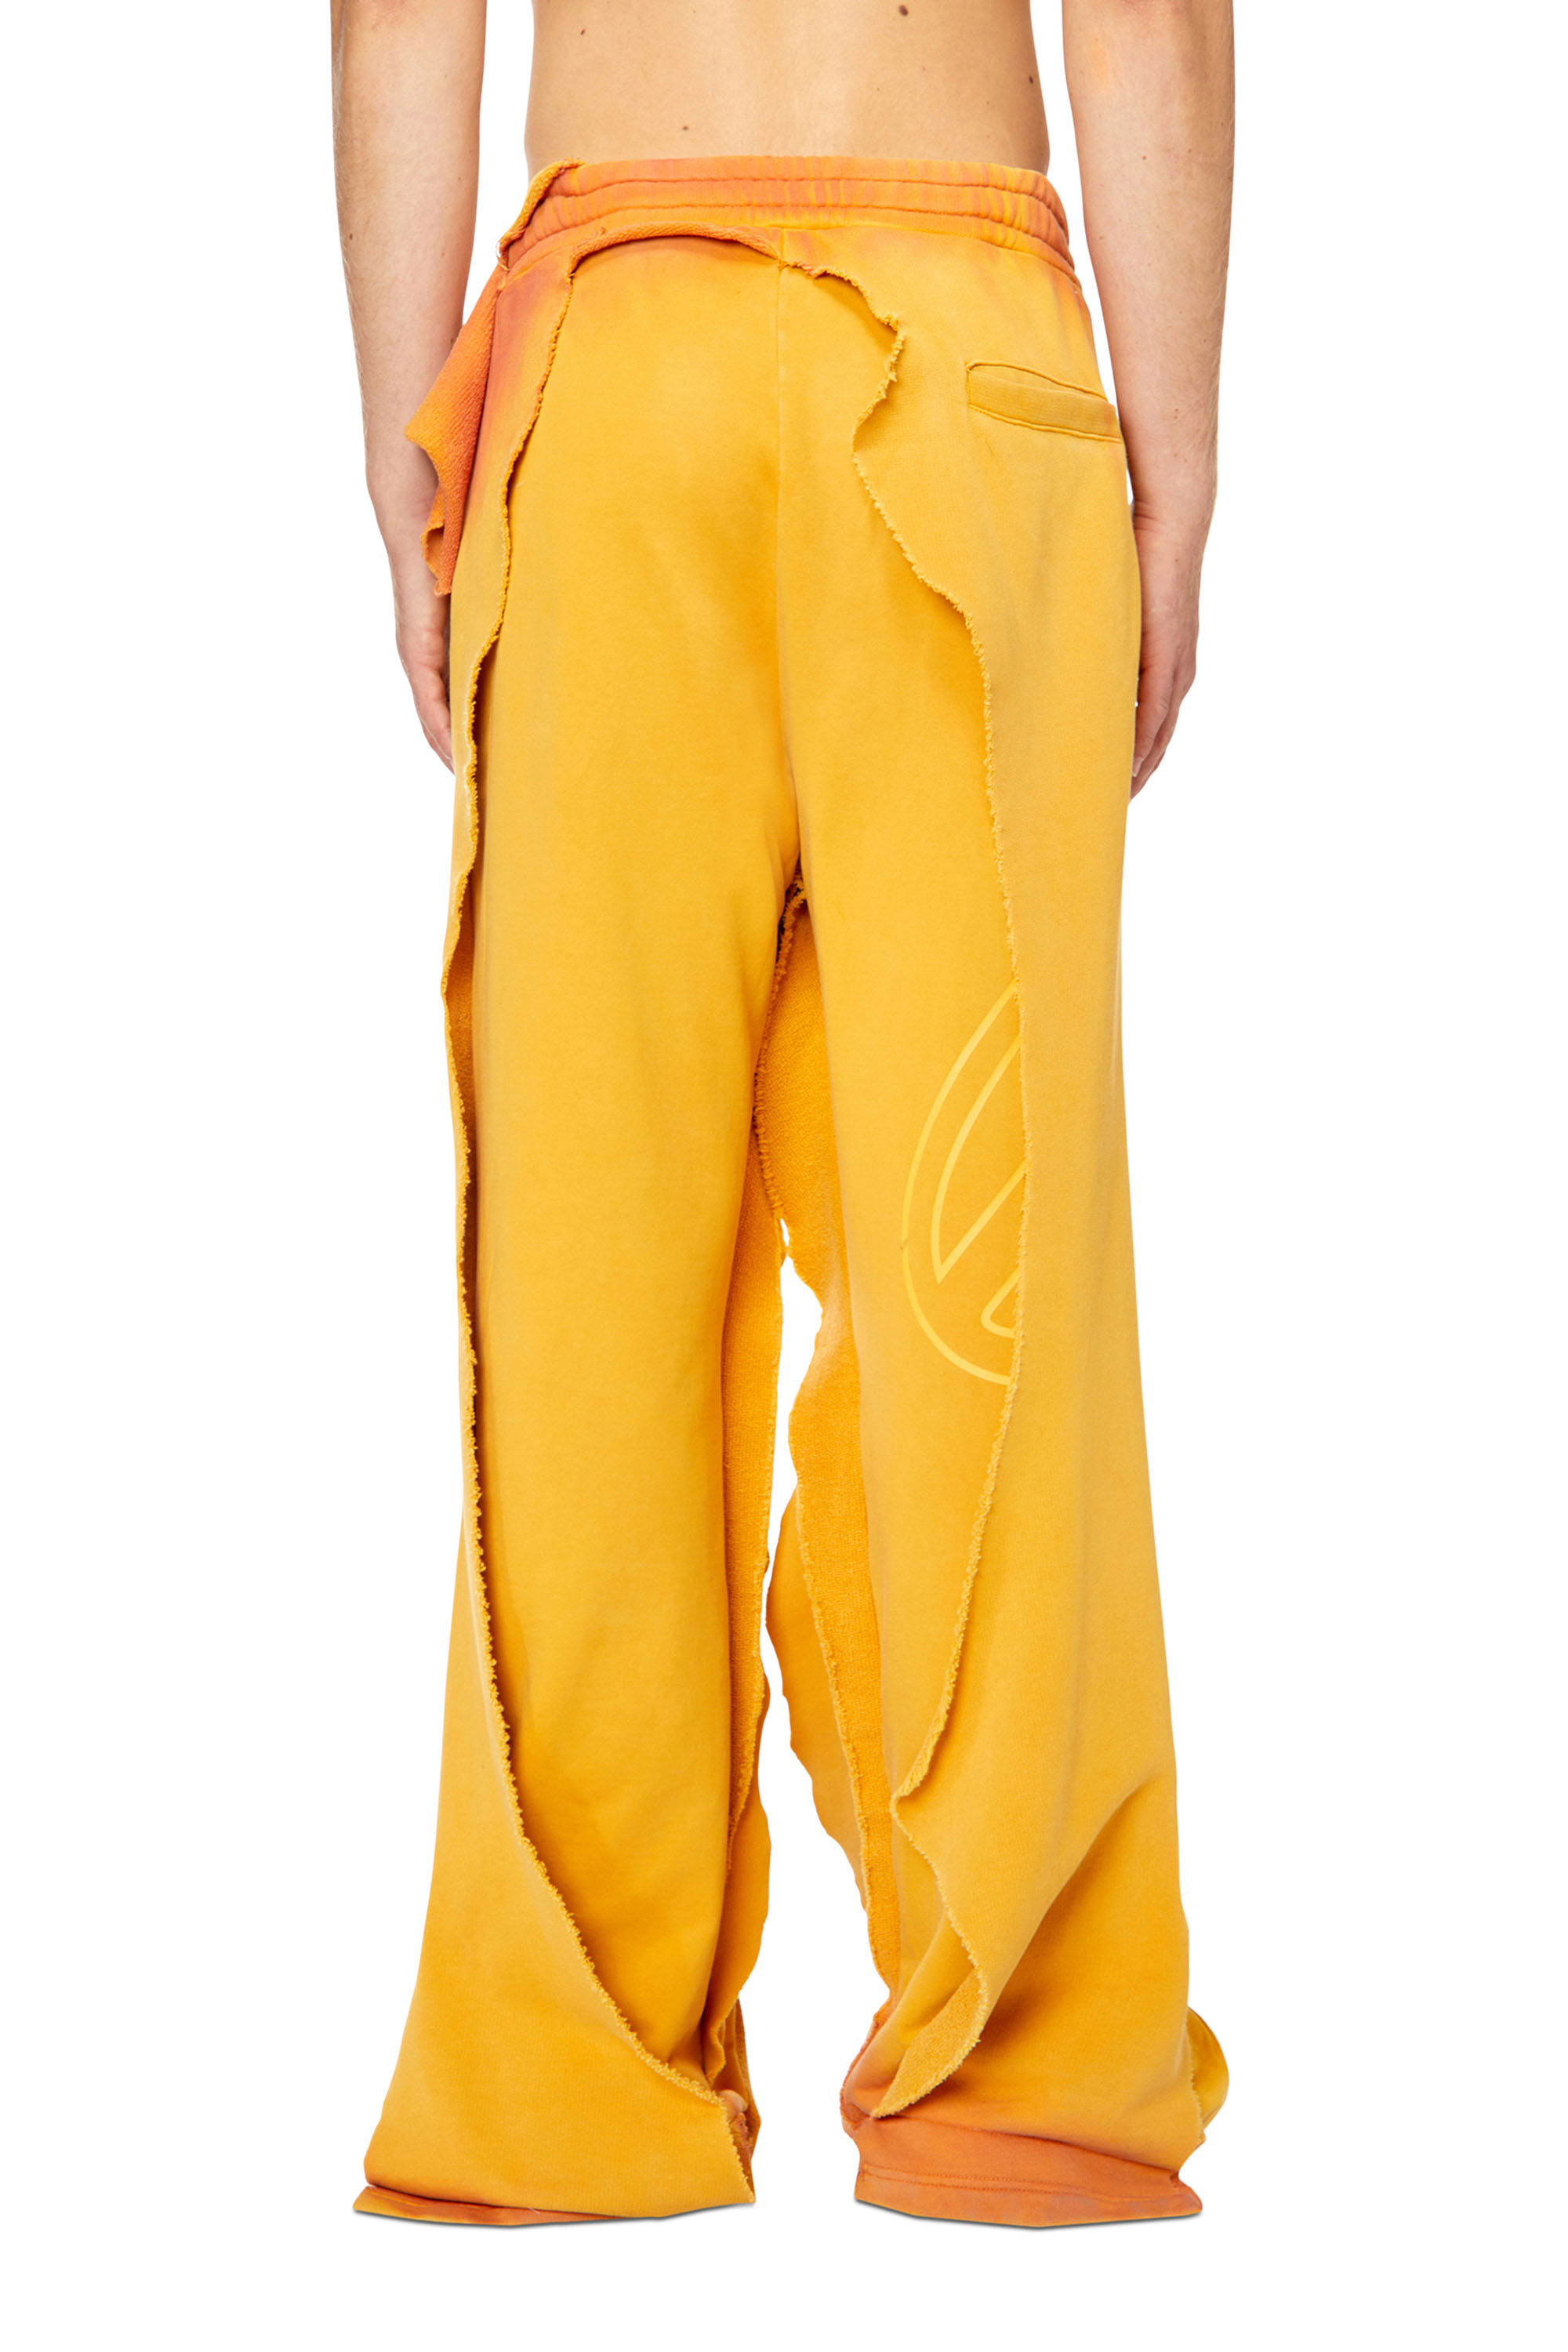 P-TOPAHOOP Man: Ripped and dyed dual-layer track pants | Diesel